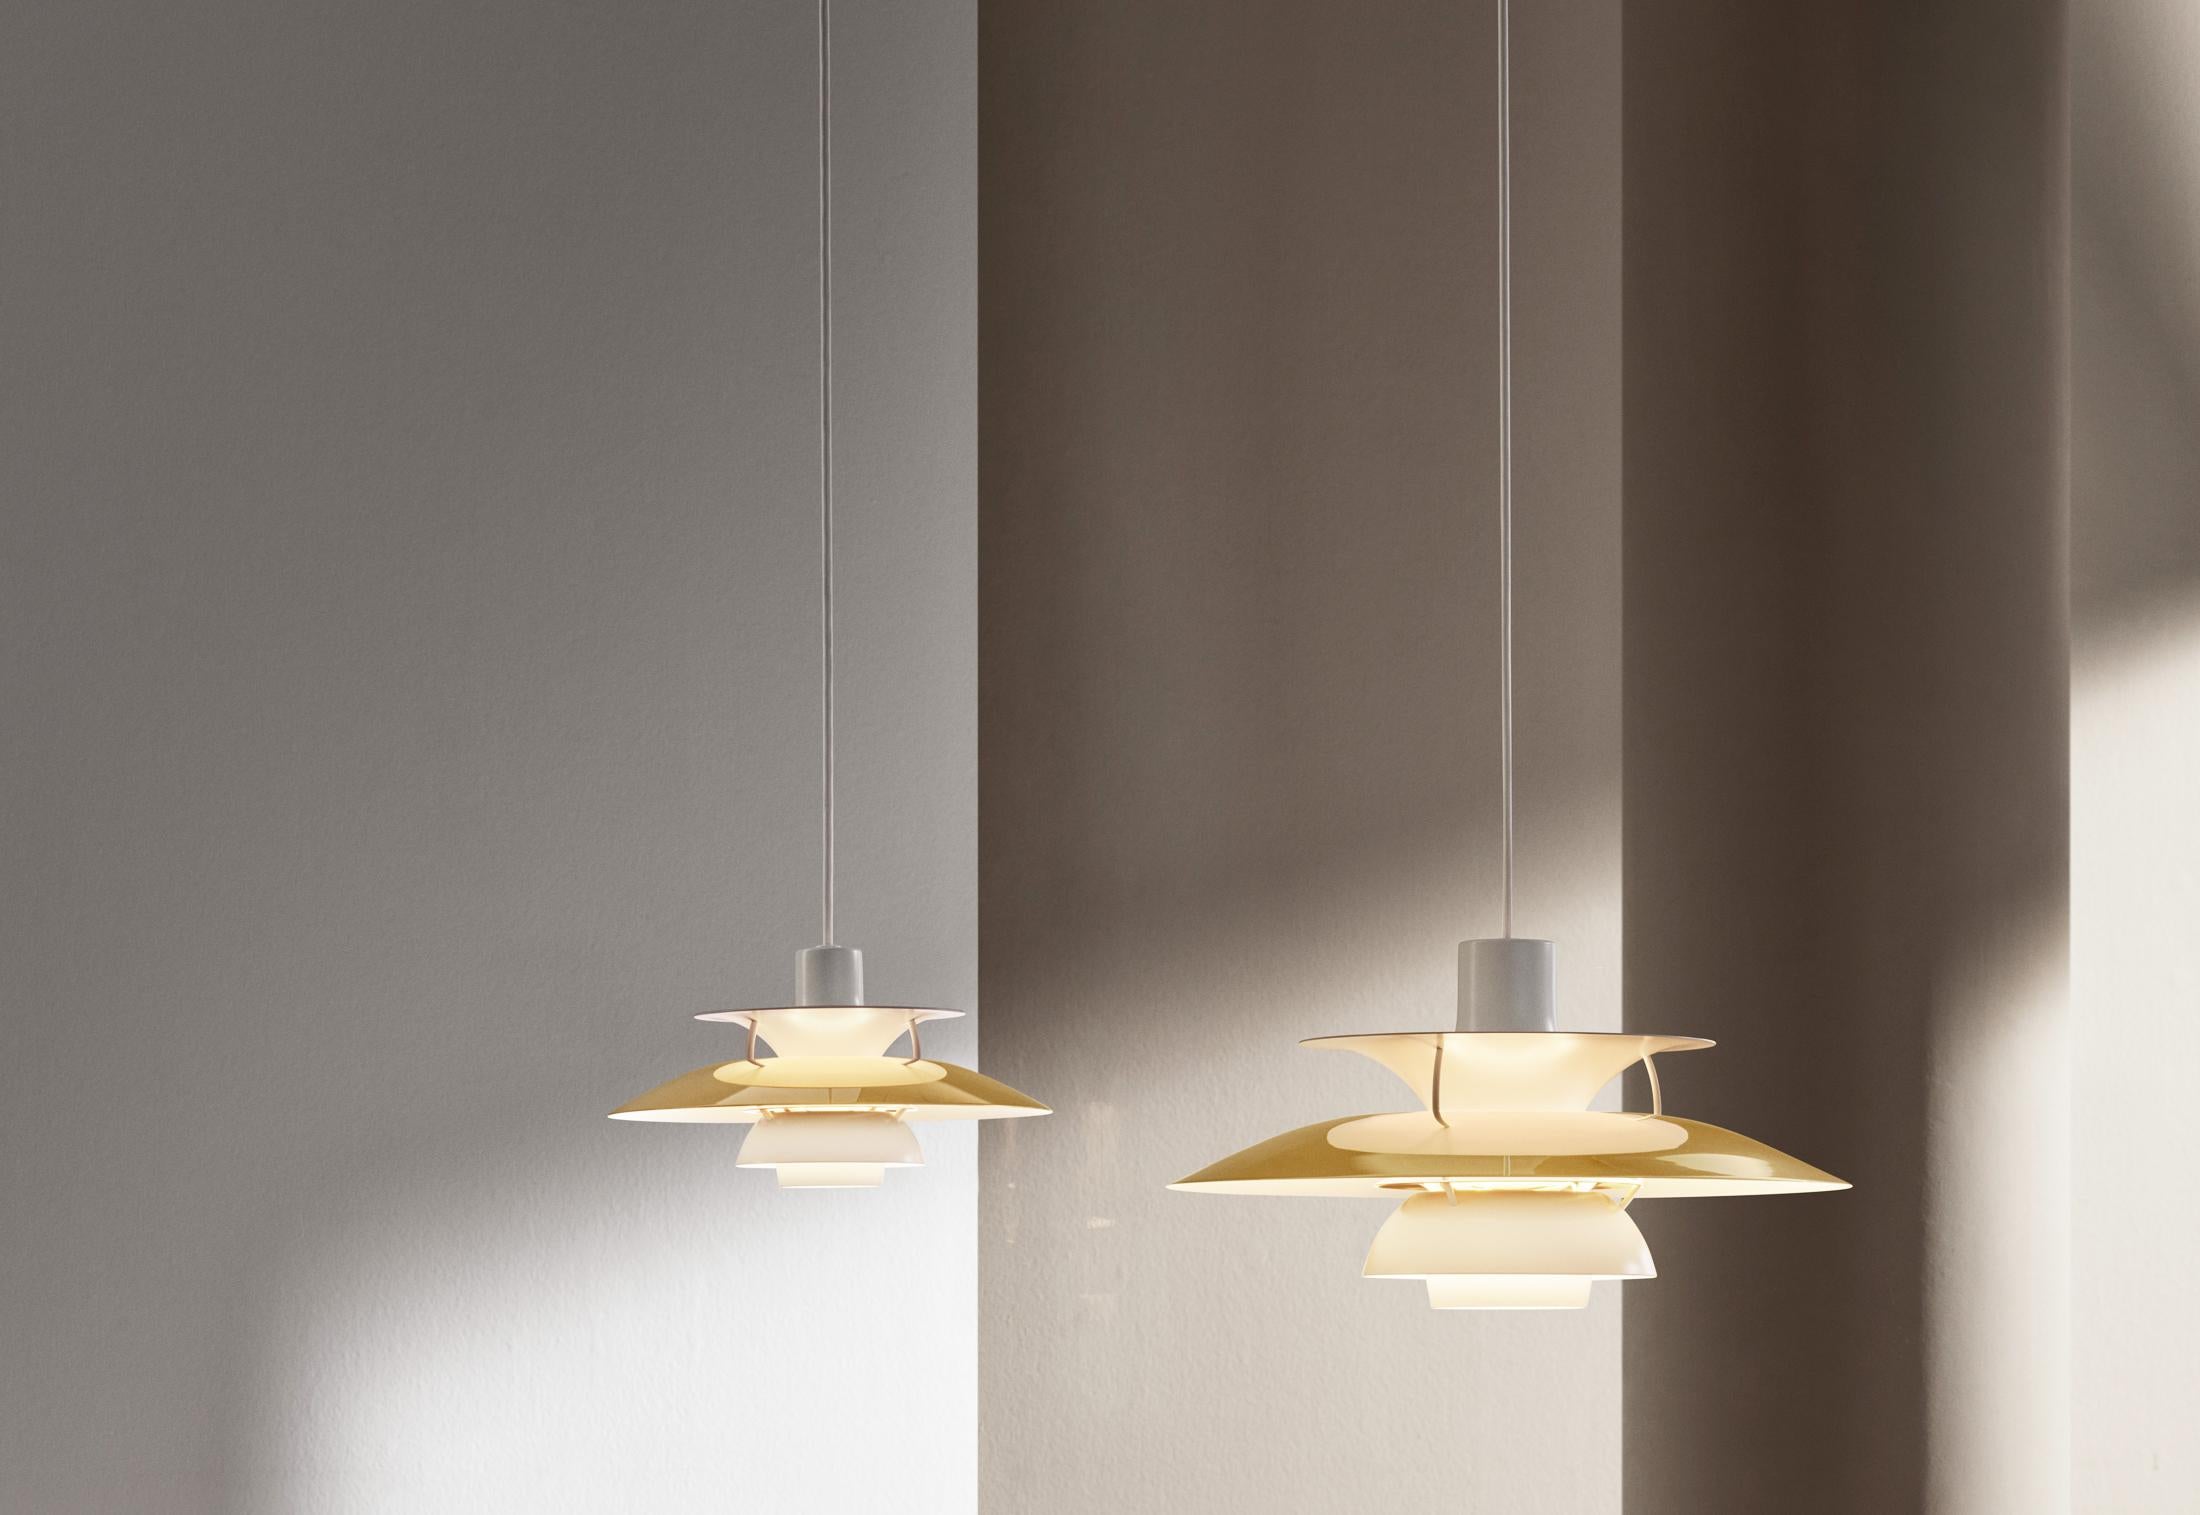 Poul Henningsen PH5 mini brass pendant for Louis Poulsen. Poul Henningsen introduced his iconic PH 5 pendant light in 1958. To celebrate, Louis Poulsen is putting out this special 60th Anniversary edition PH 5 mini and Classic in brass and copper.